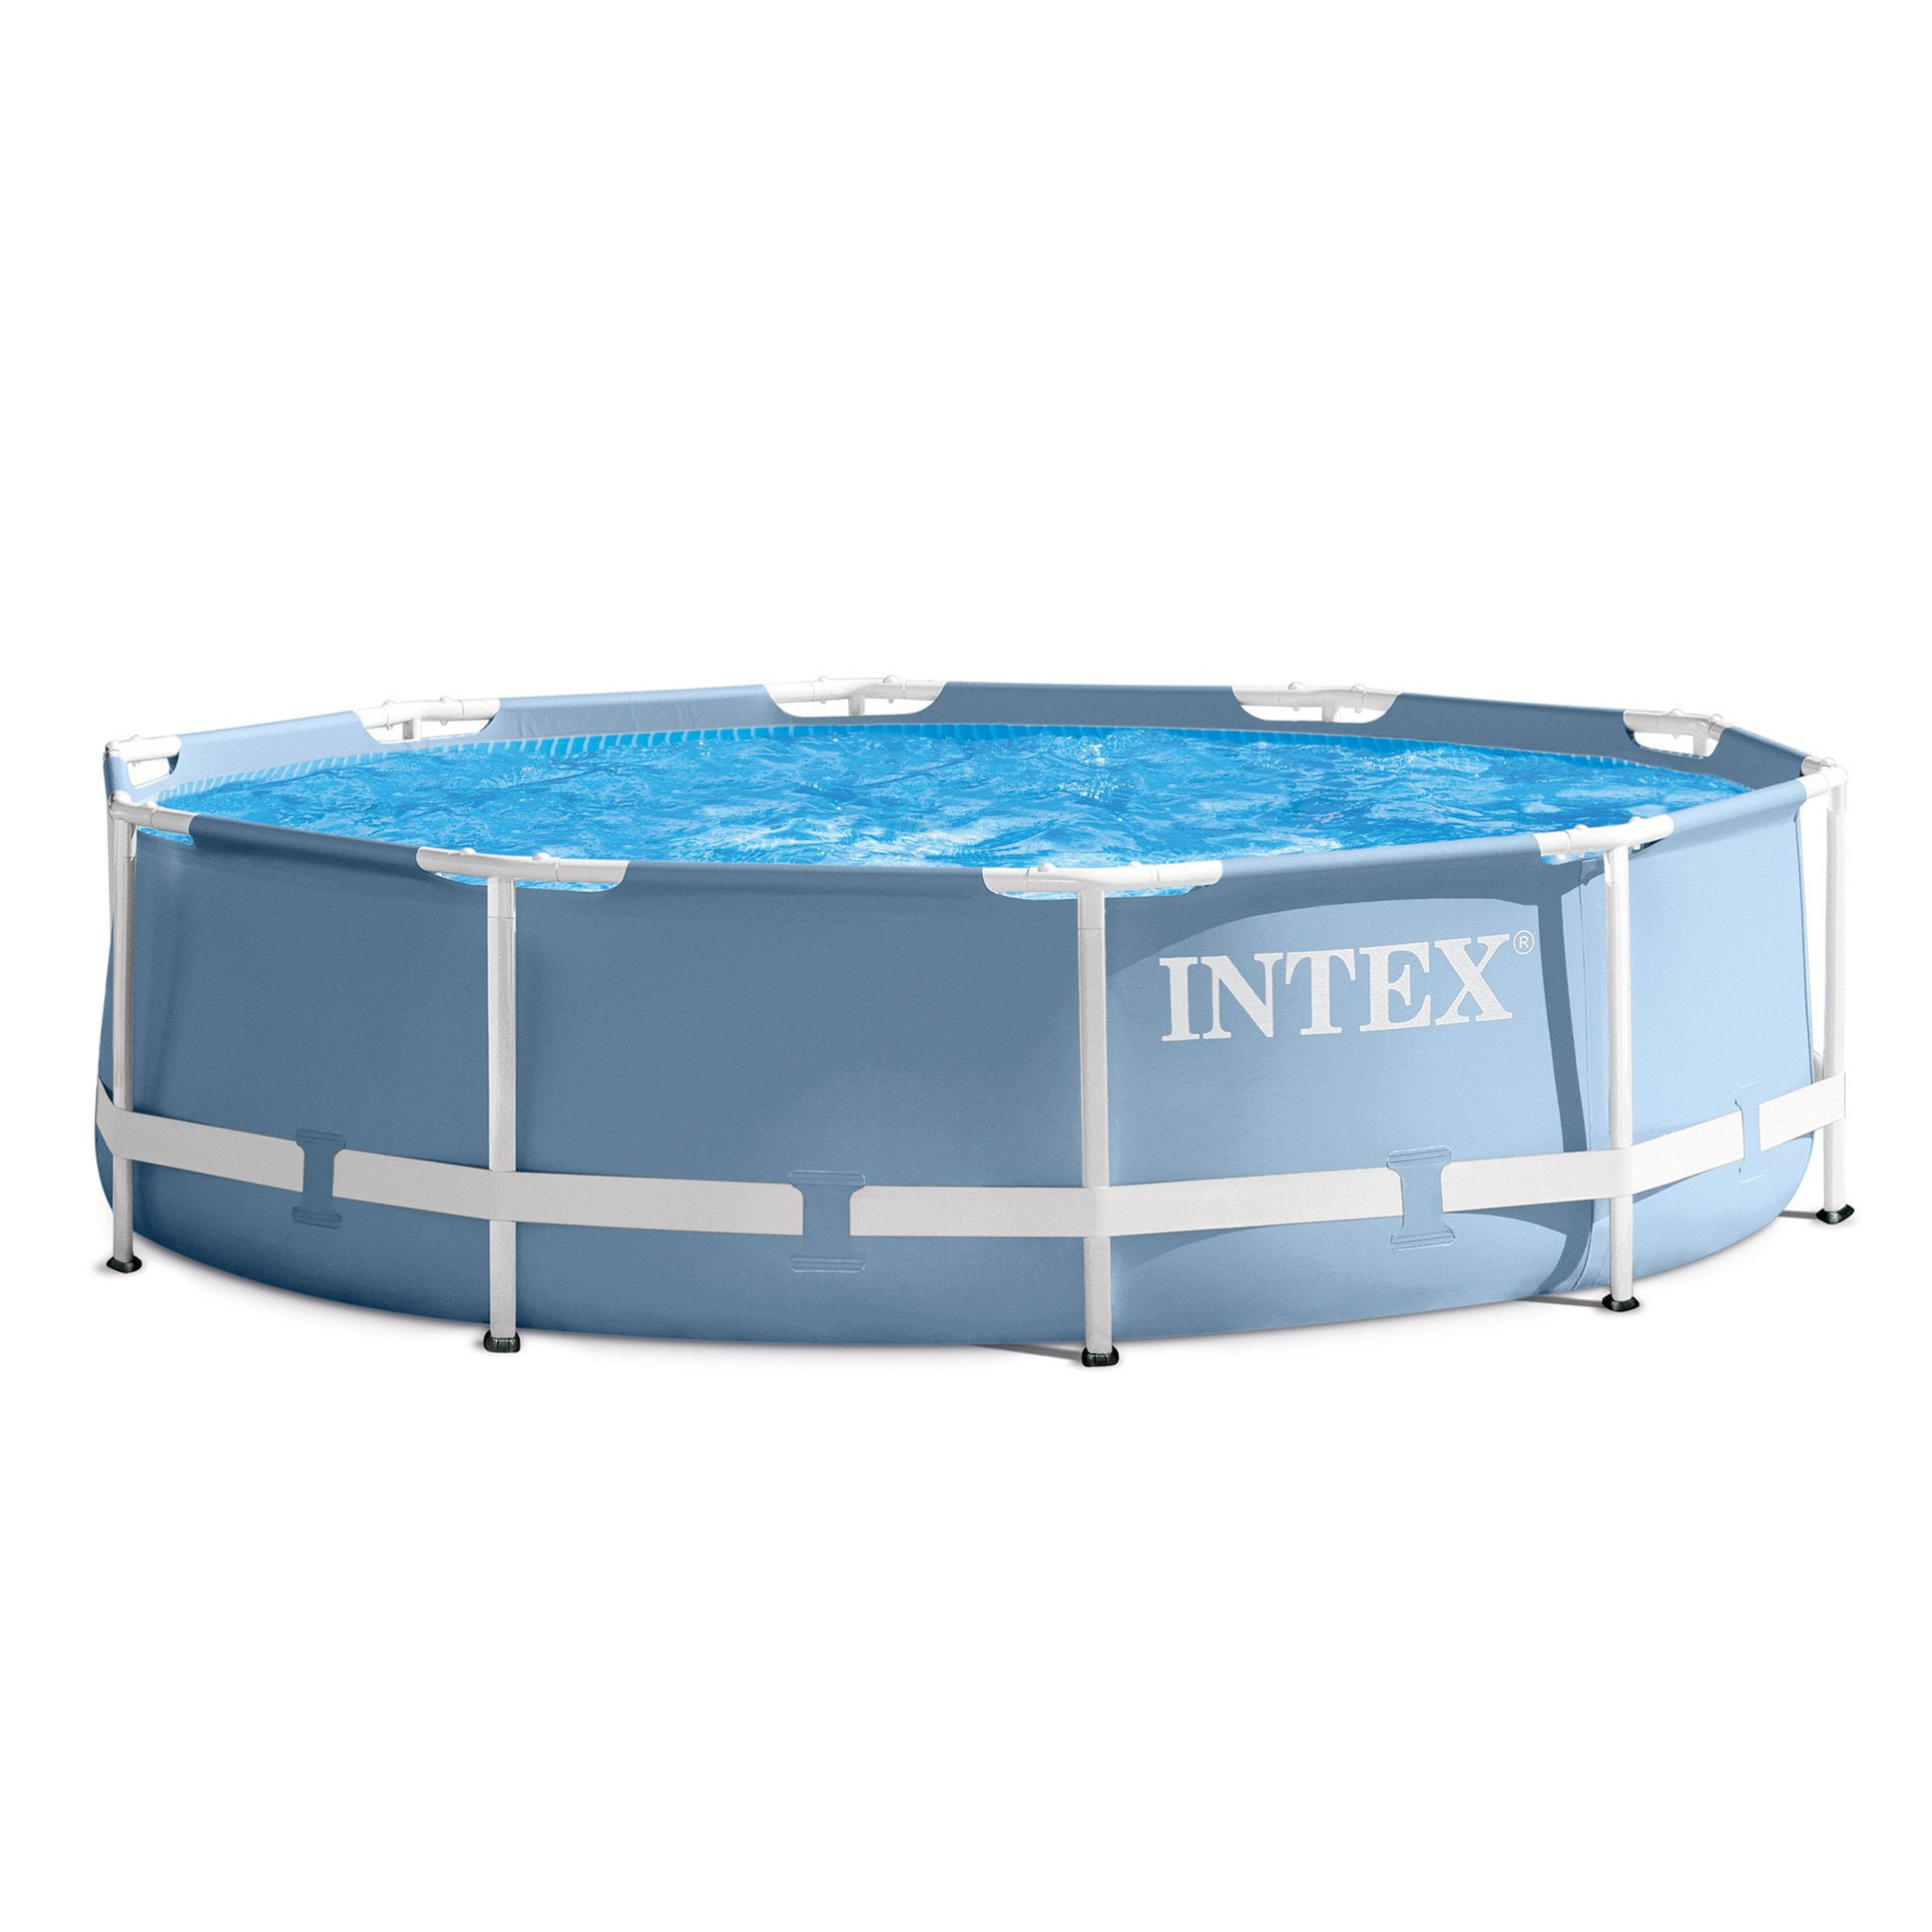 tent outer Play computer games Intex 10' x 30" Prism Frame Round Above Ground Family Summer Swimming Pool  - Walmart.com